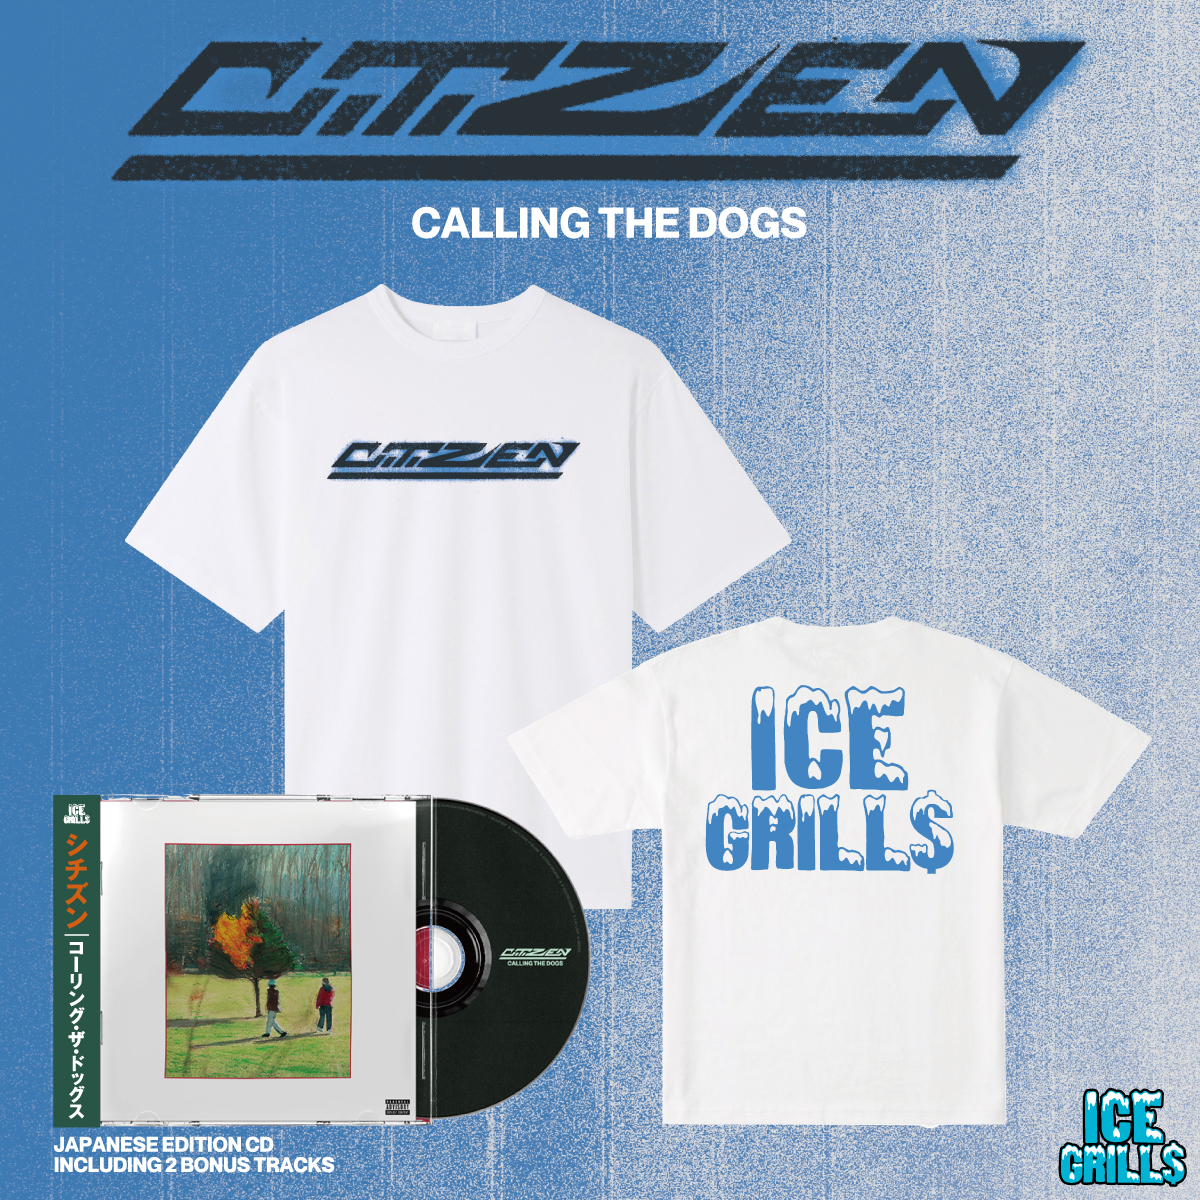 Citizen – ‘Calling The Dogs’ Pre-orders available now